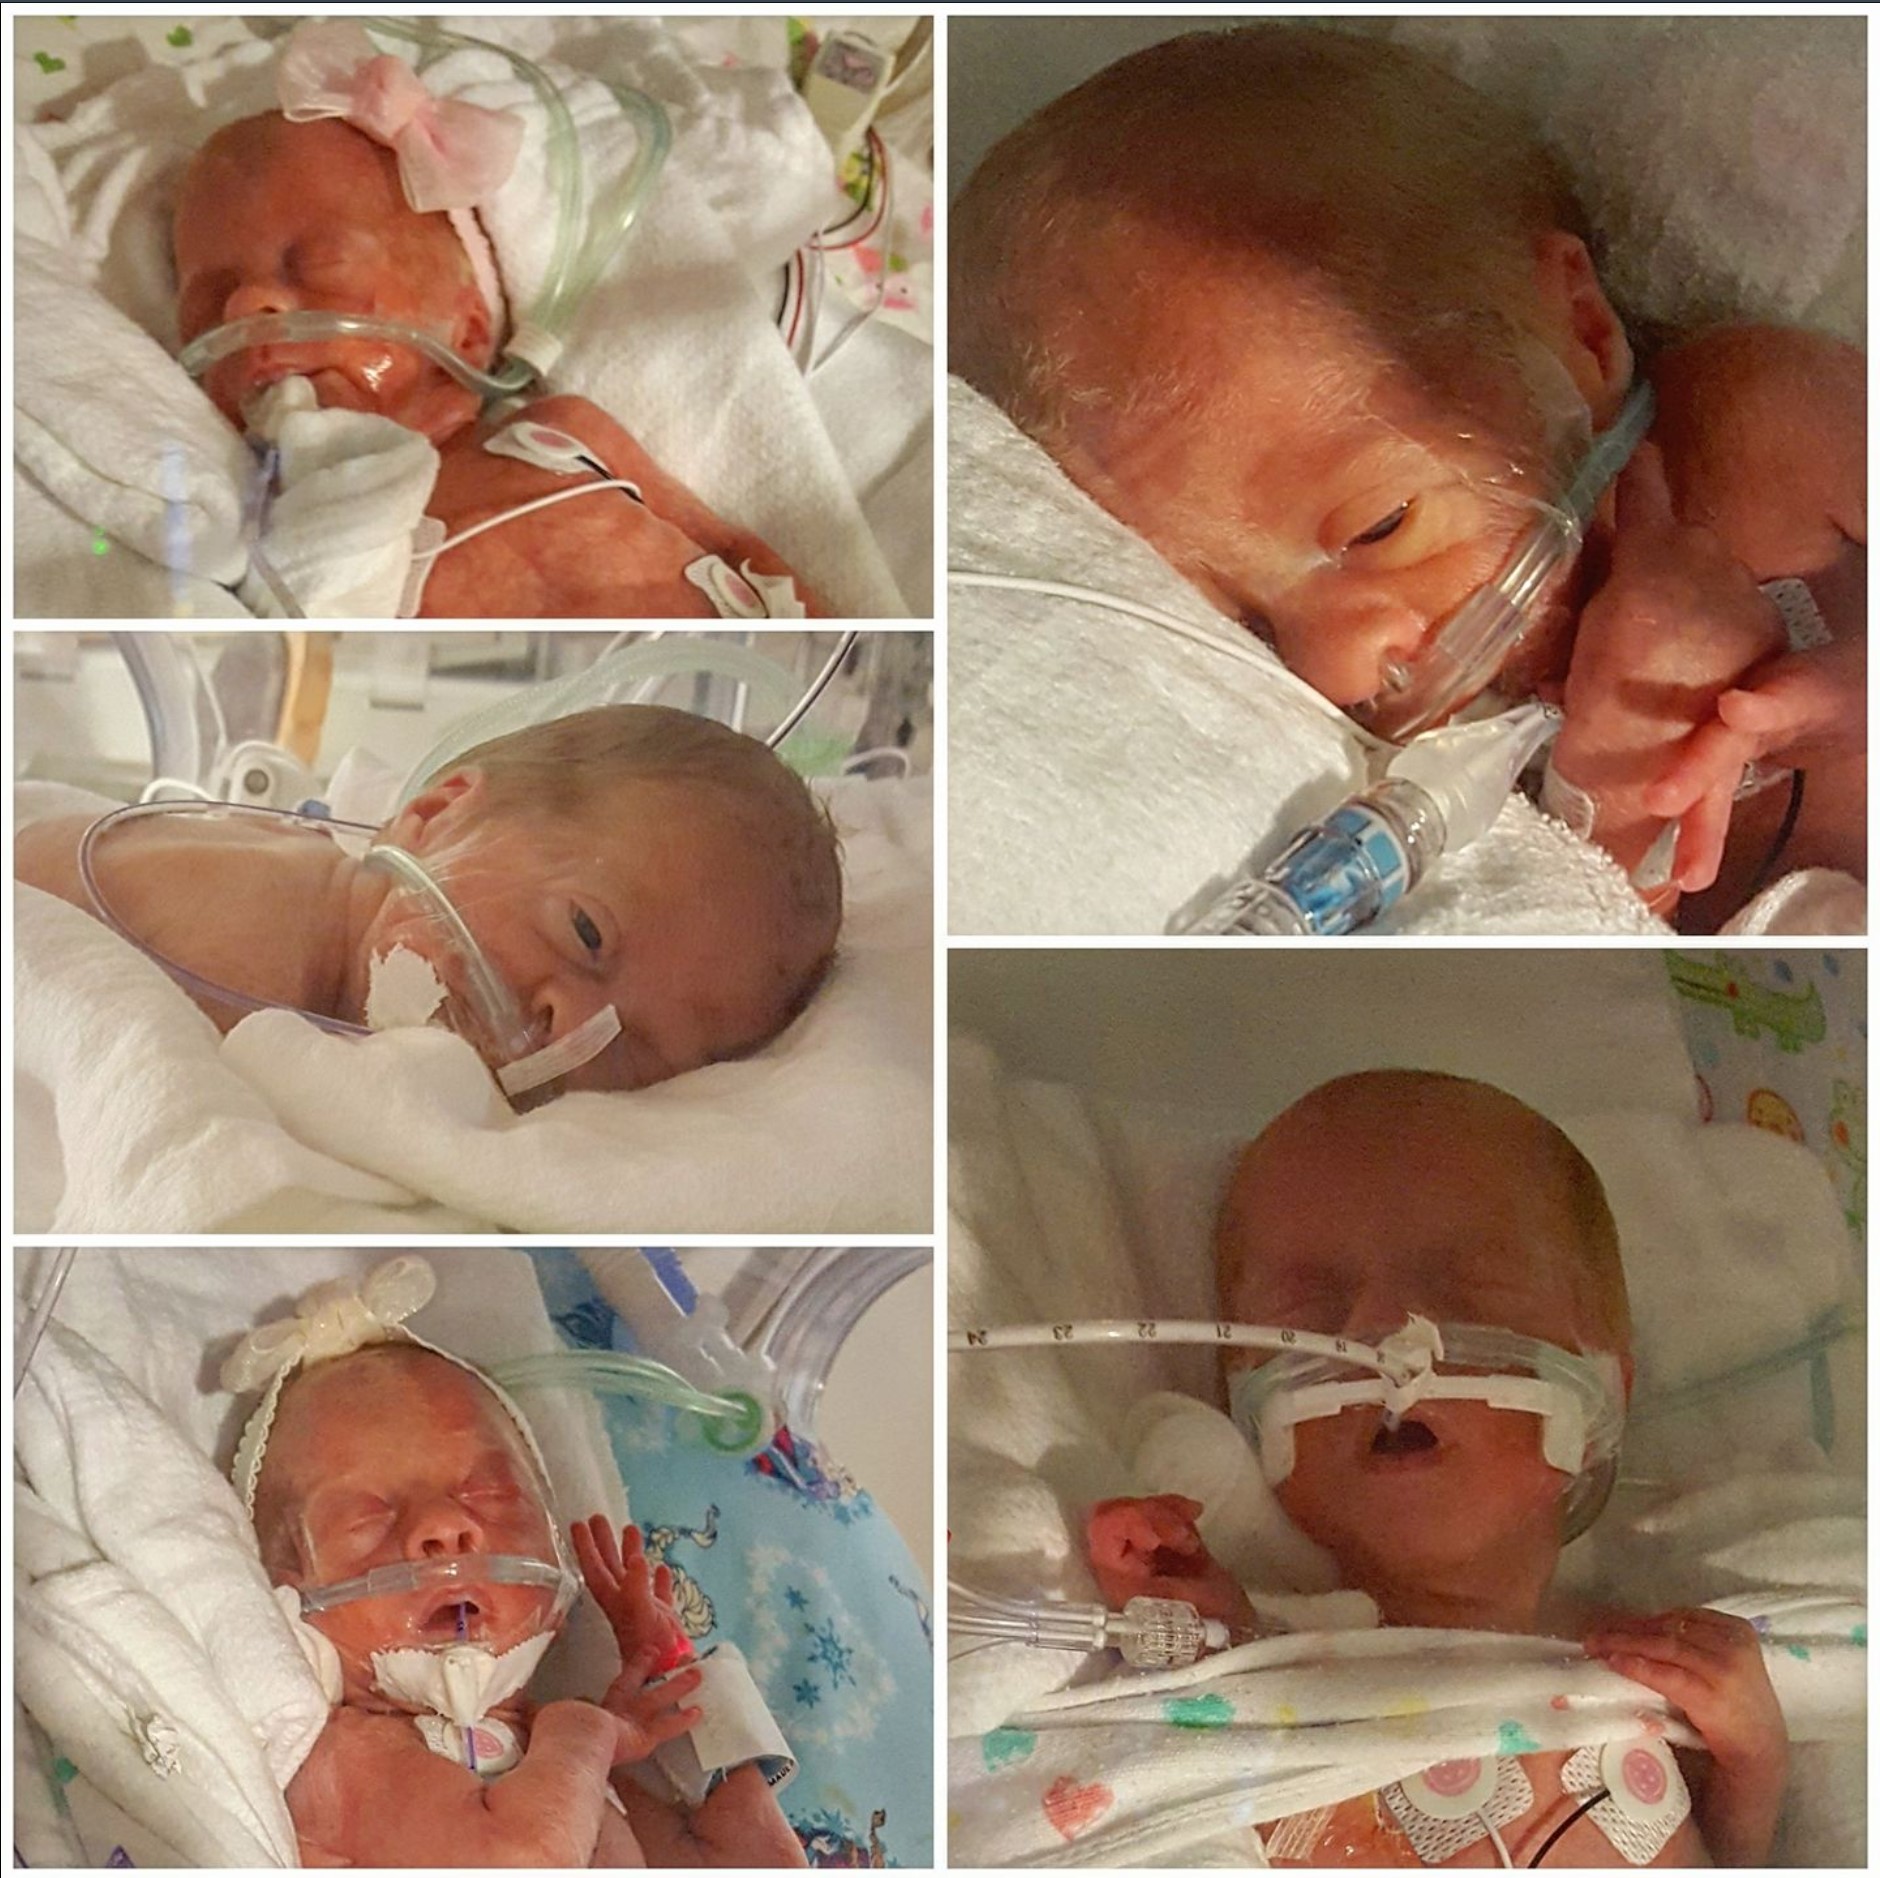 Driskell quintuplets at neonatal intensive care unit at birth.